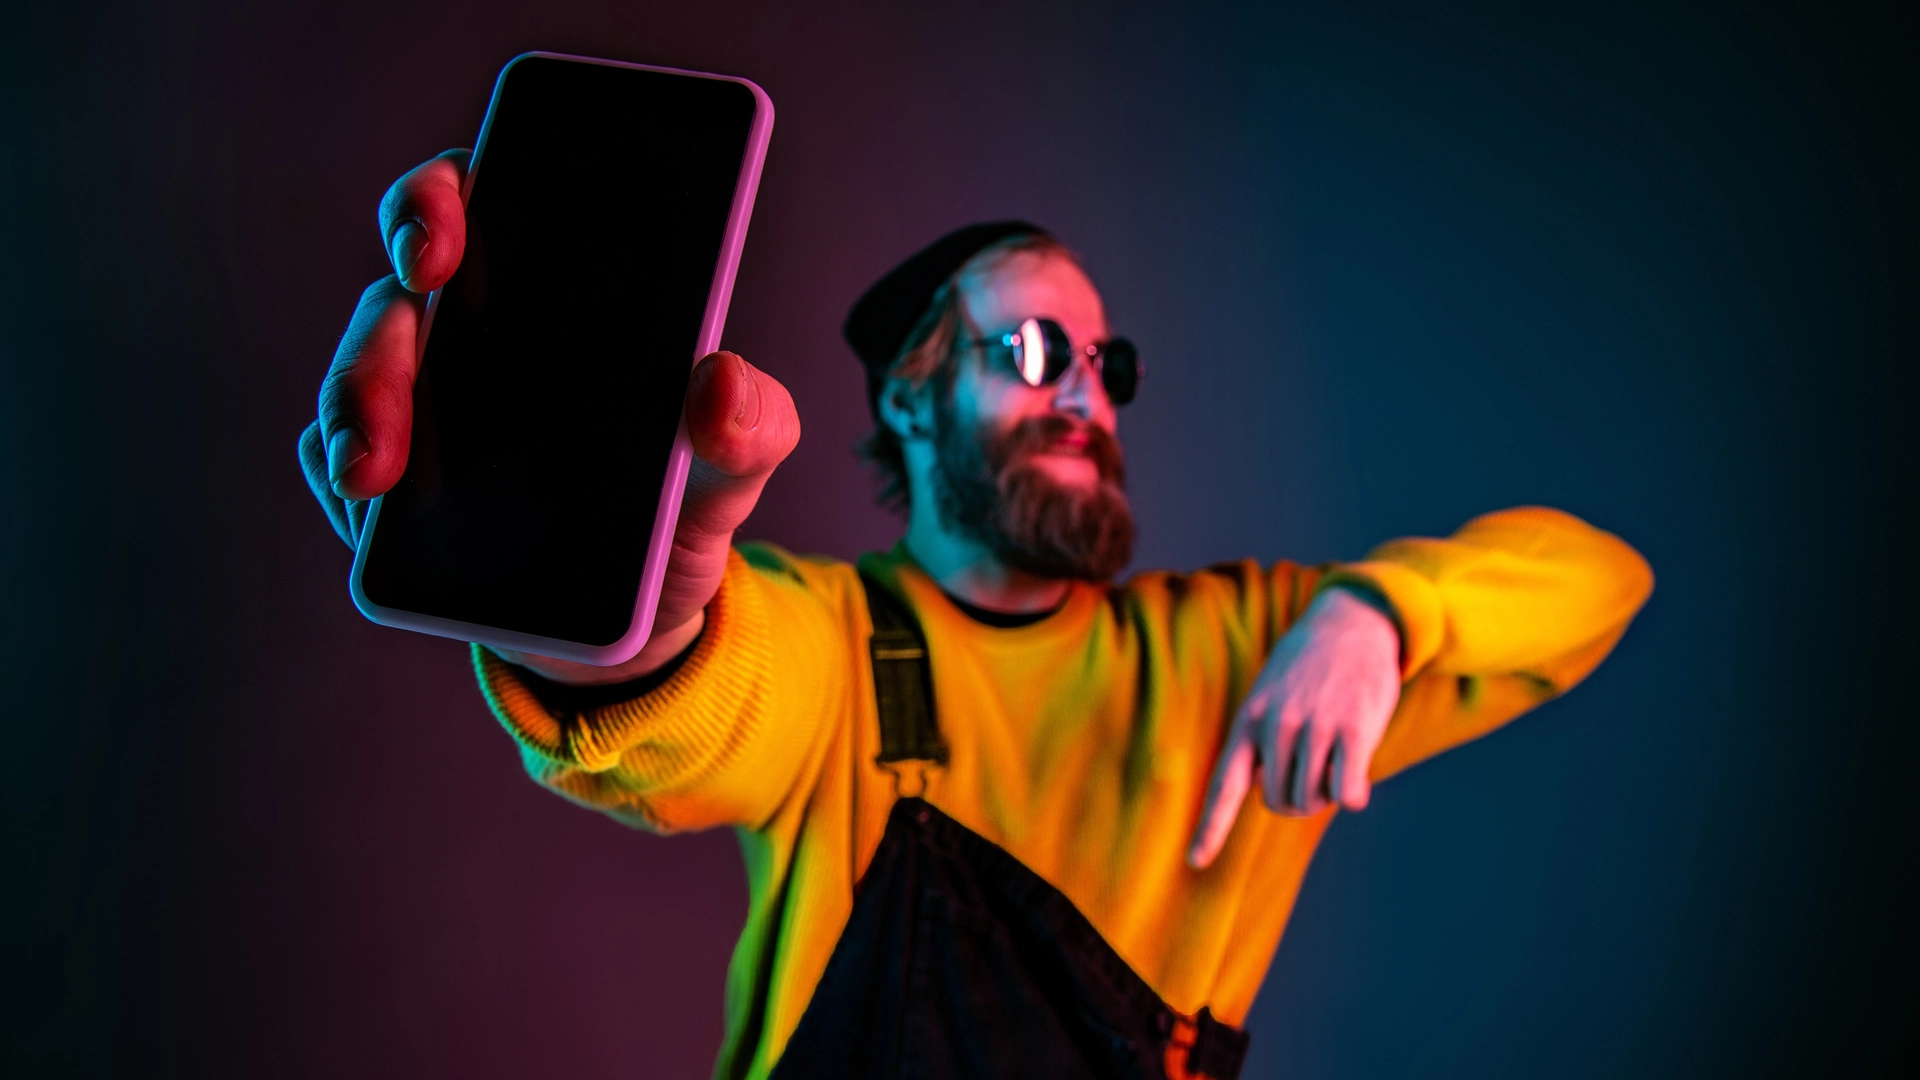 showing-phone-s-blank-screen-caucasian-man-s-portrait-gradient-studio-background-neon-light-beautiful-male-model-with-hipster-style-concept-human-emotions-facial-expression-sales-ad